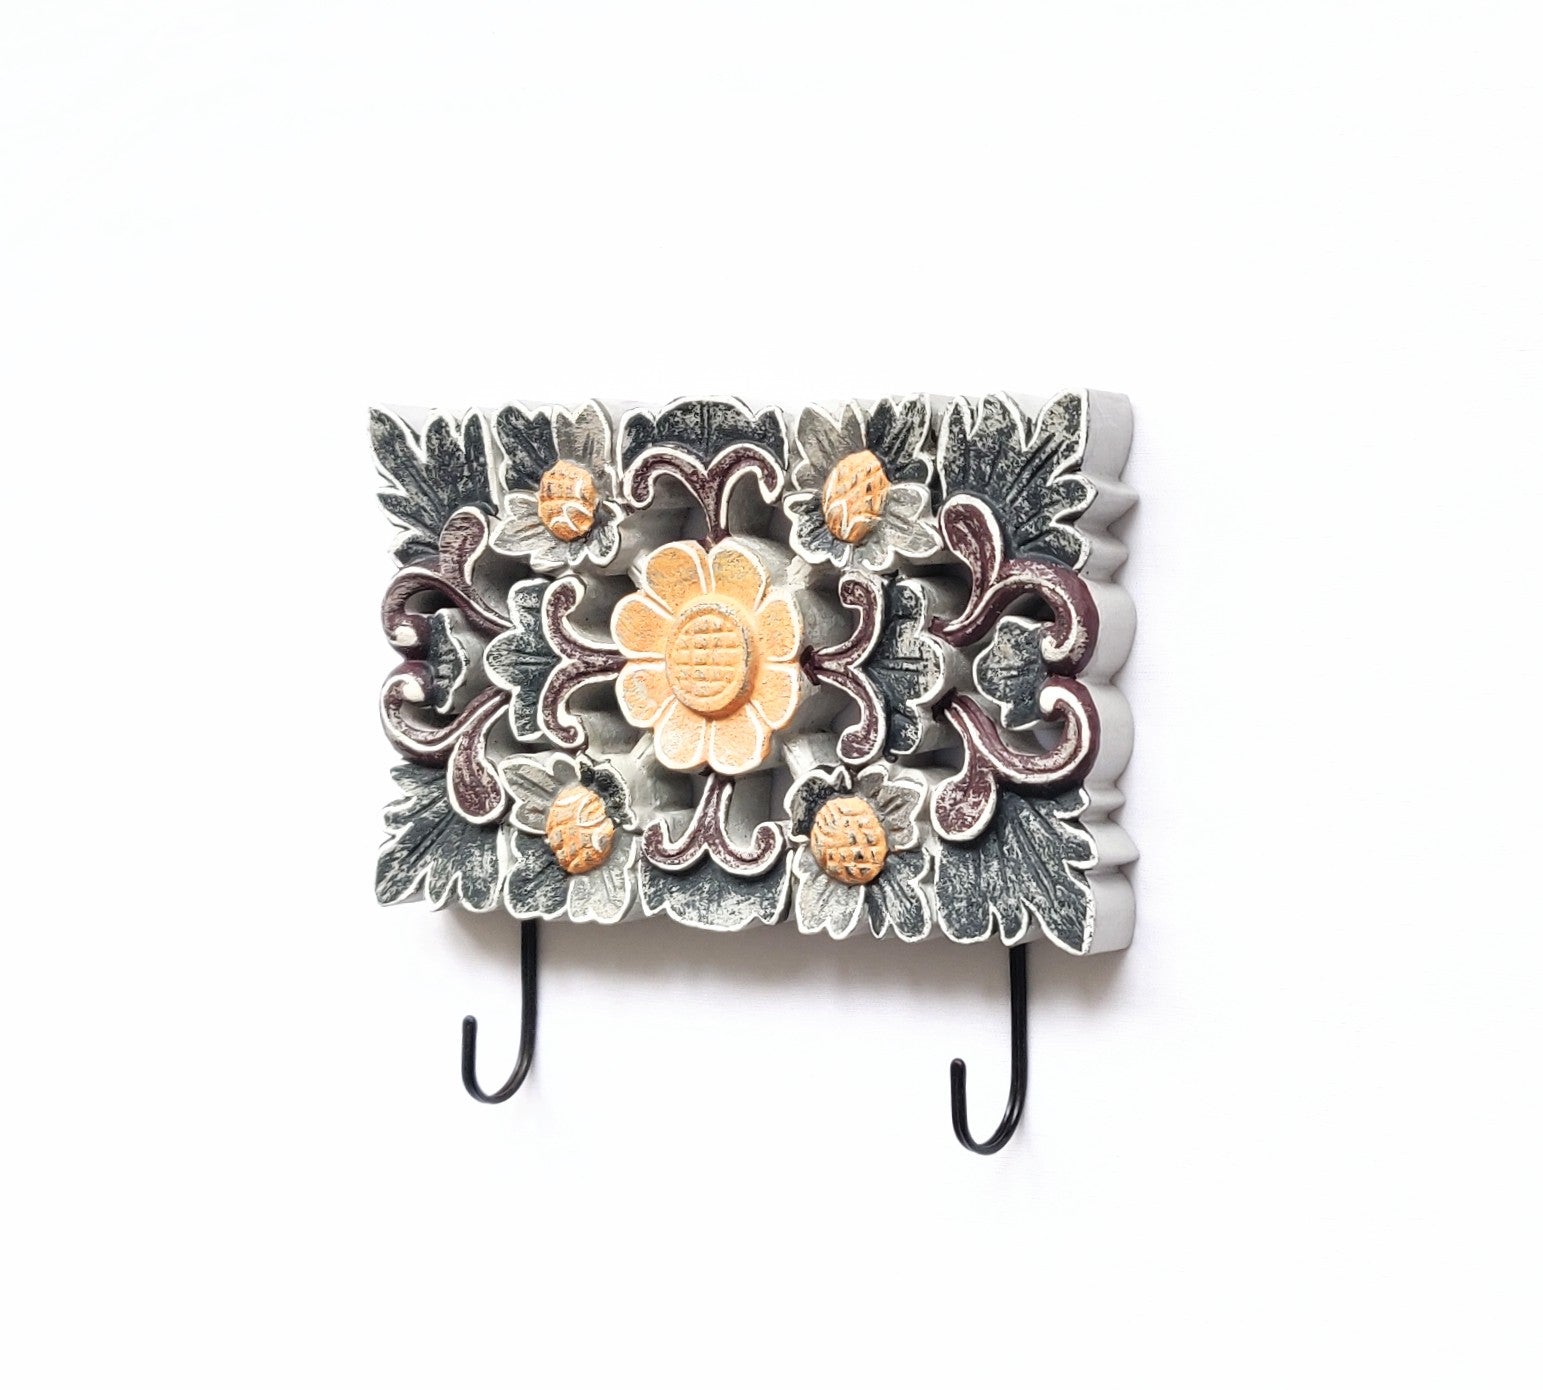 Wall Accent. Wooden handcrafted floral design key holder - hanger